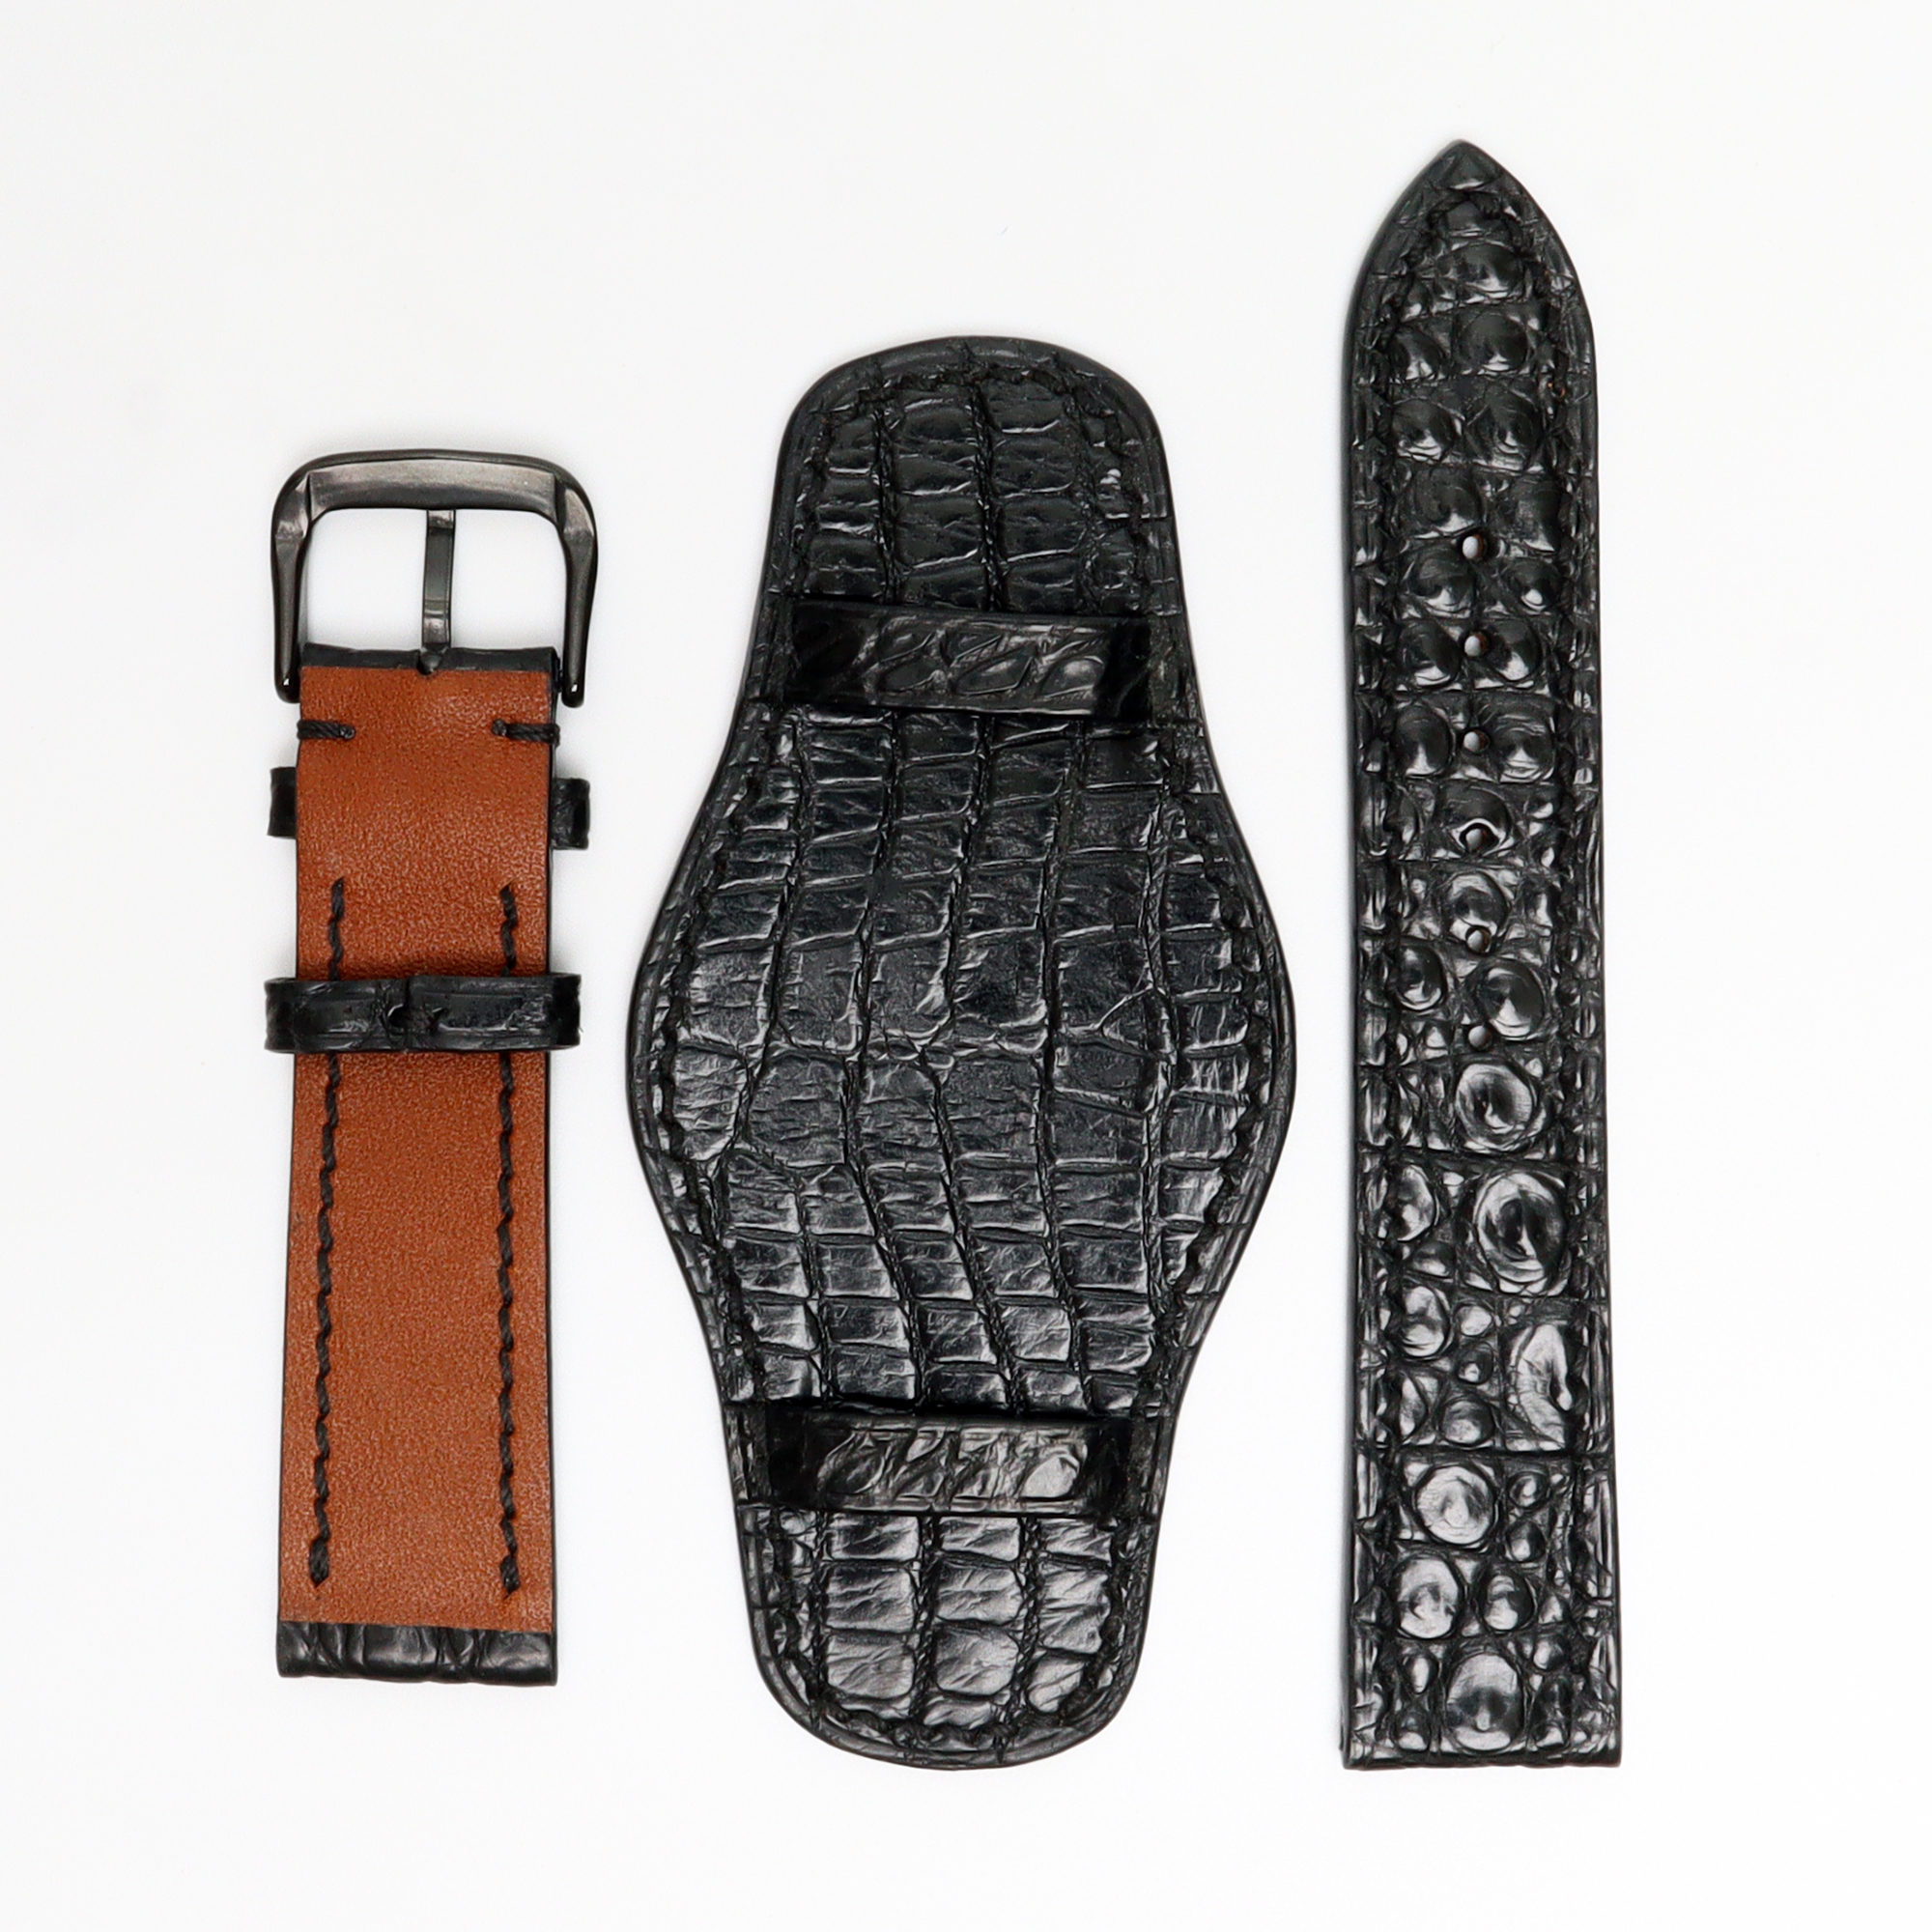 Genuine Alligator Leather Watch Straps, Leather Watch Bands Quick Release Pins, Handmade Leather Watch Strap #6